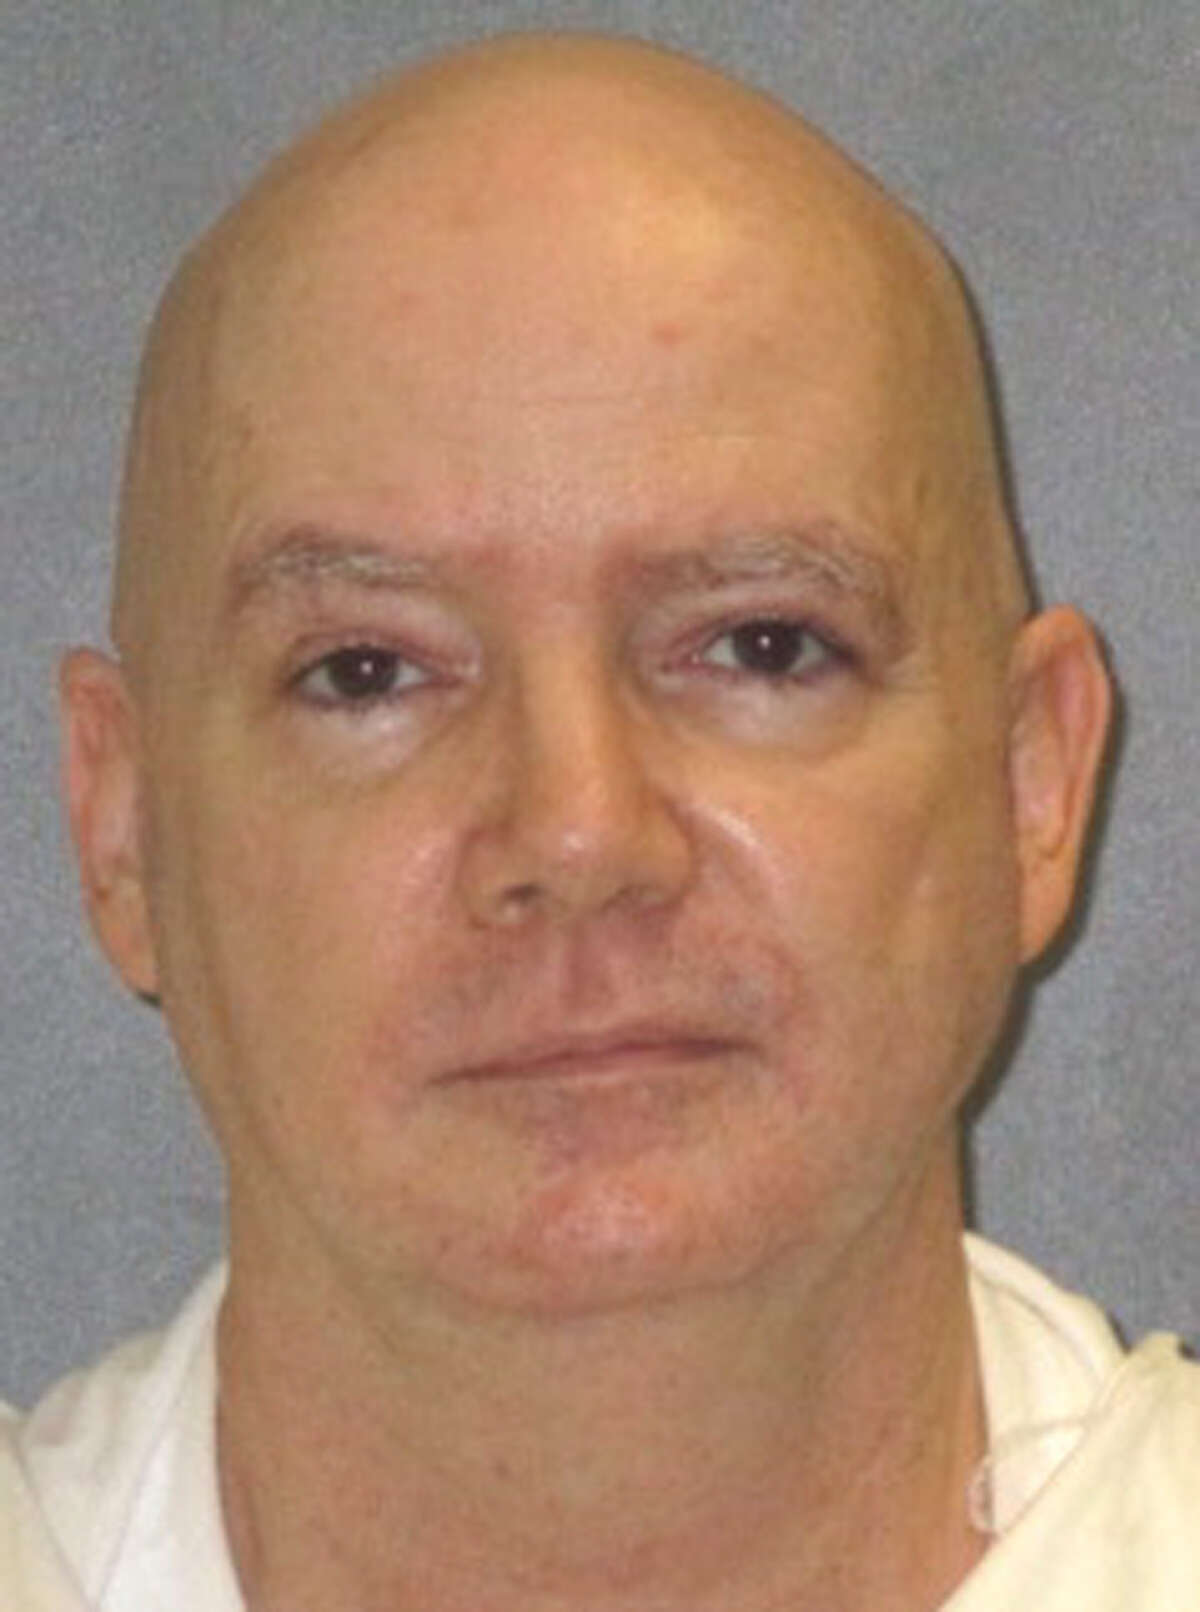 This photo provided by the Texas Department of Criminal Justice shows Anthony Shore. The U.S. Supreme Court has refused an appeal from convicted killer Shore, facing execution in Texas this month. The high court, without comment, declined to review appeal from the death row inmate. The 55-year-old Shore is set for lethal injection Oct. 18 for the 1992 slaying of a 20-year-old woman in Houston. He has confessed to that killing and three others. (Texas Department of Criminal Justice via AP)